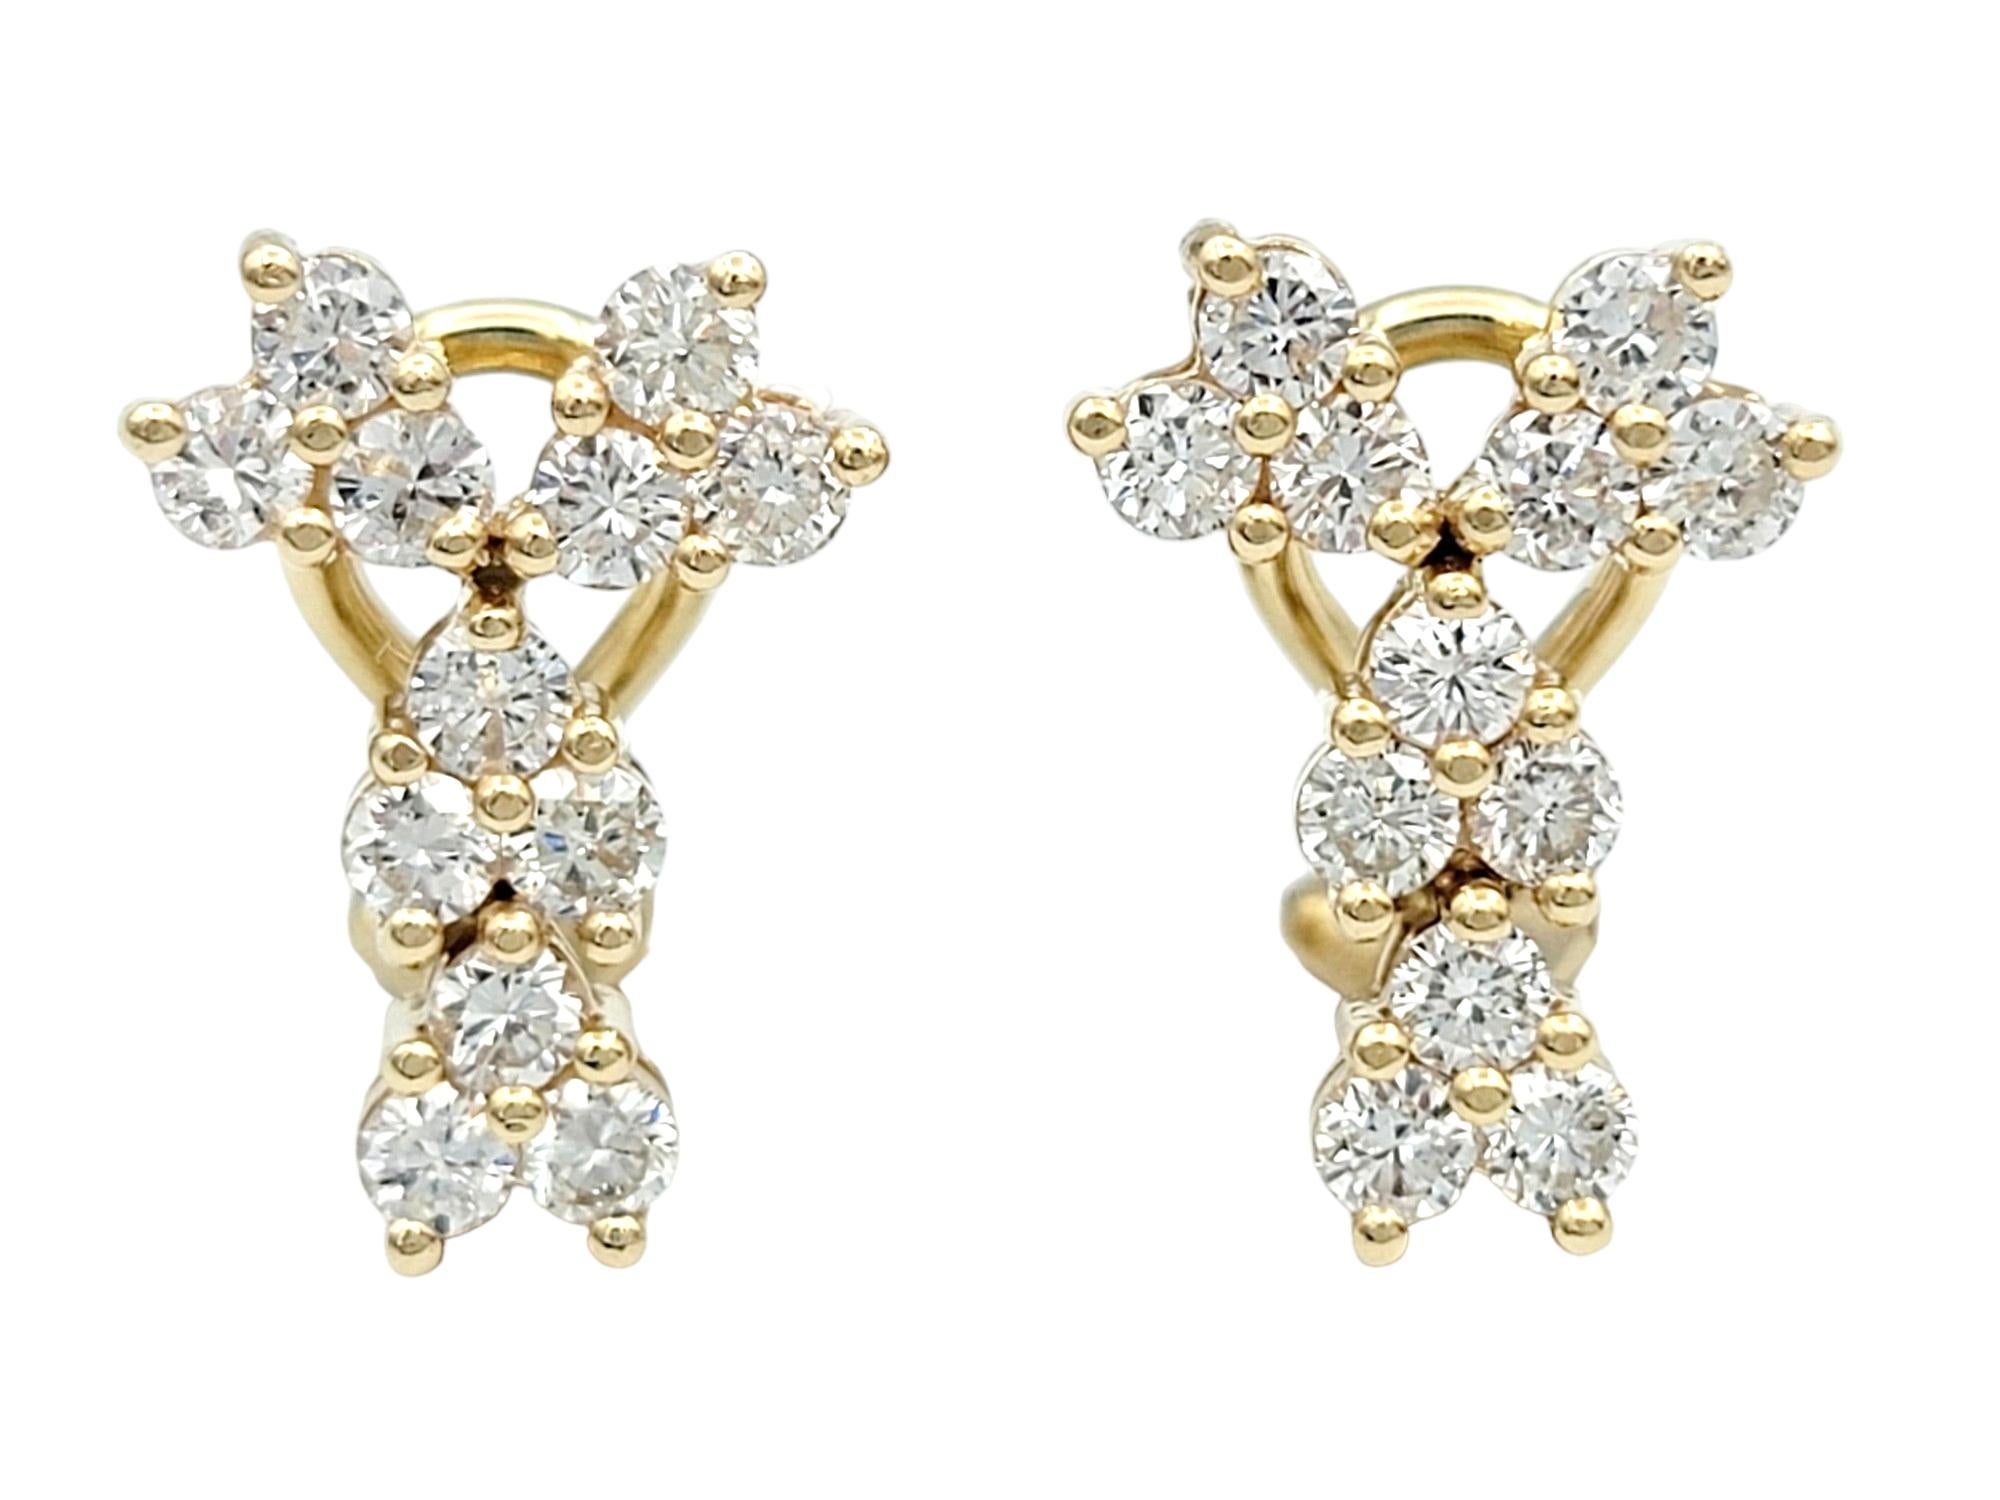 These shimmering diamond earrings, set in lustrous 14 karat yellow gold, showcase a charming trio cluster formation that adds both brilliance and visual interest. The scattered arrangement of sets of three diamonds on each earring creates a playful